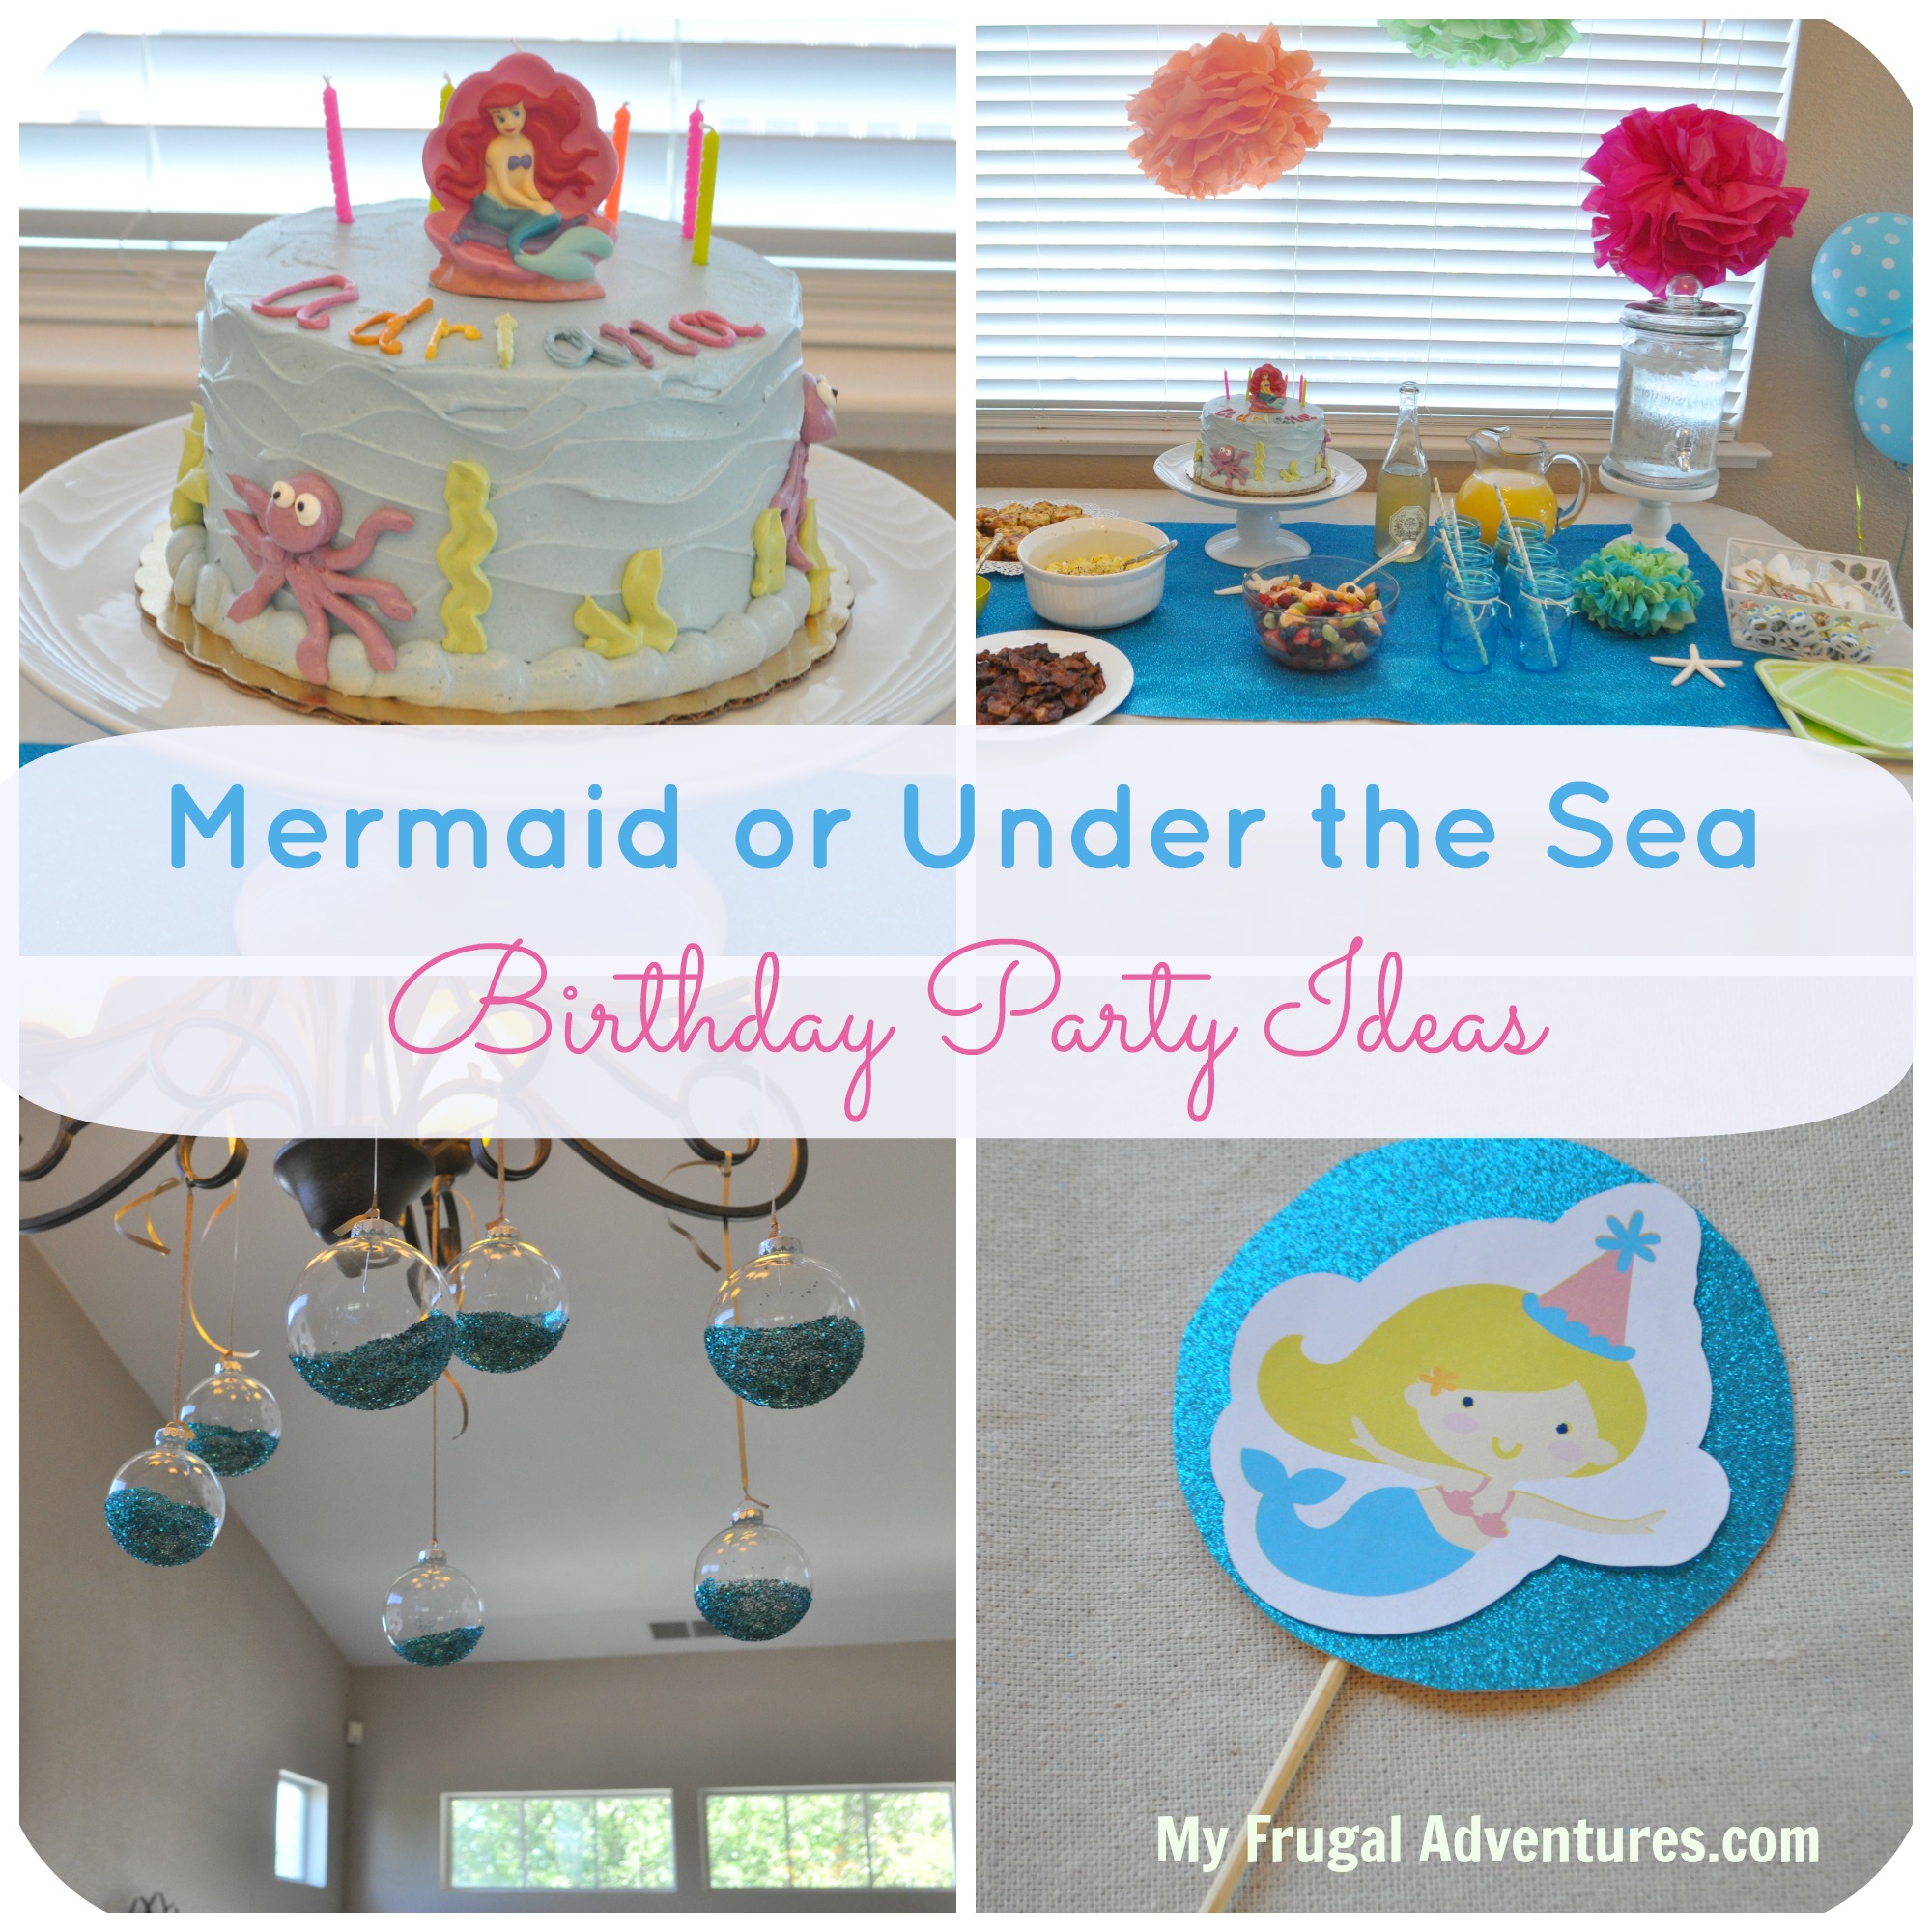 Mermaid or Under the Sea Party Ideas & Inspiration - My Frugal